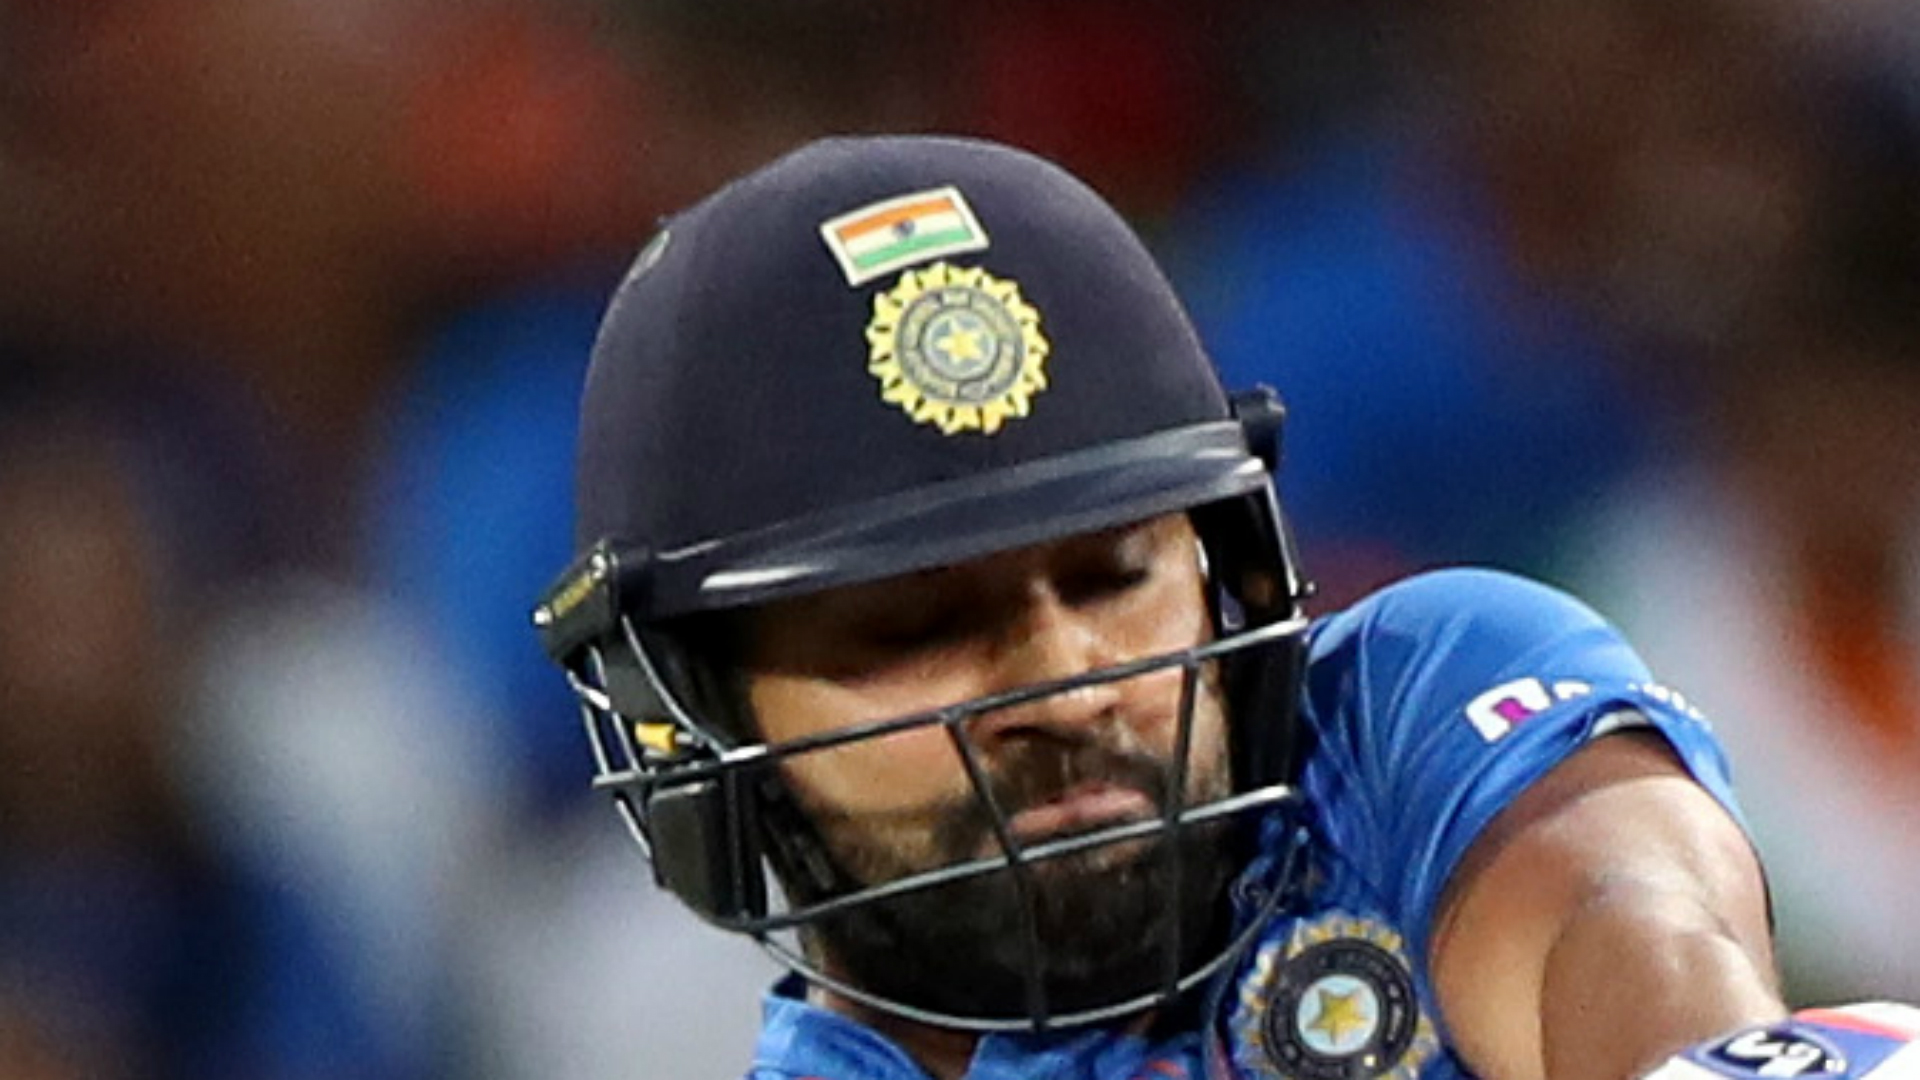 The Kolkata Knight Riders fell well short against the Mumbai Indians as Rohit Sharma starred in the Indian Premier League.